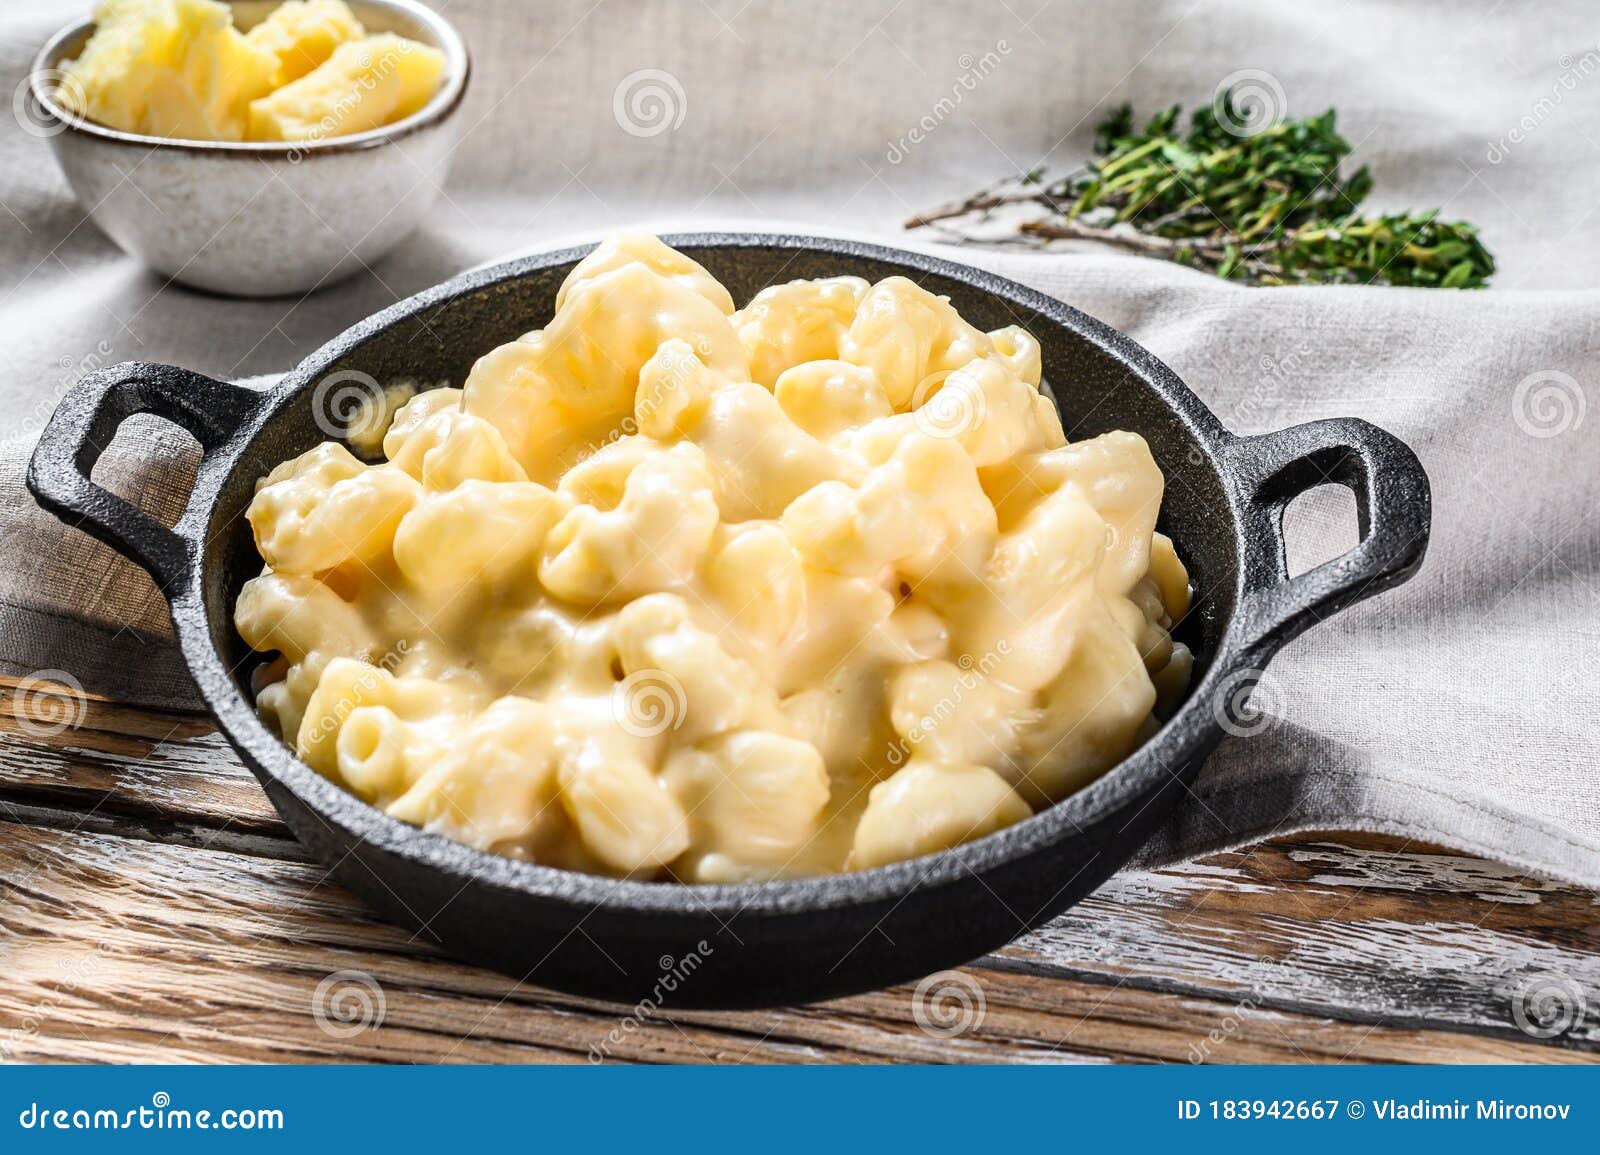 mac and cheese, american style macaroni pasta in cheesy sauce. white wooden background. top view